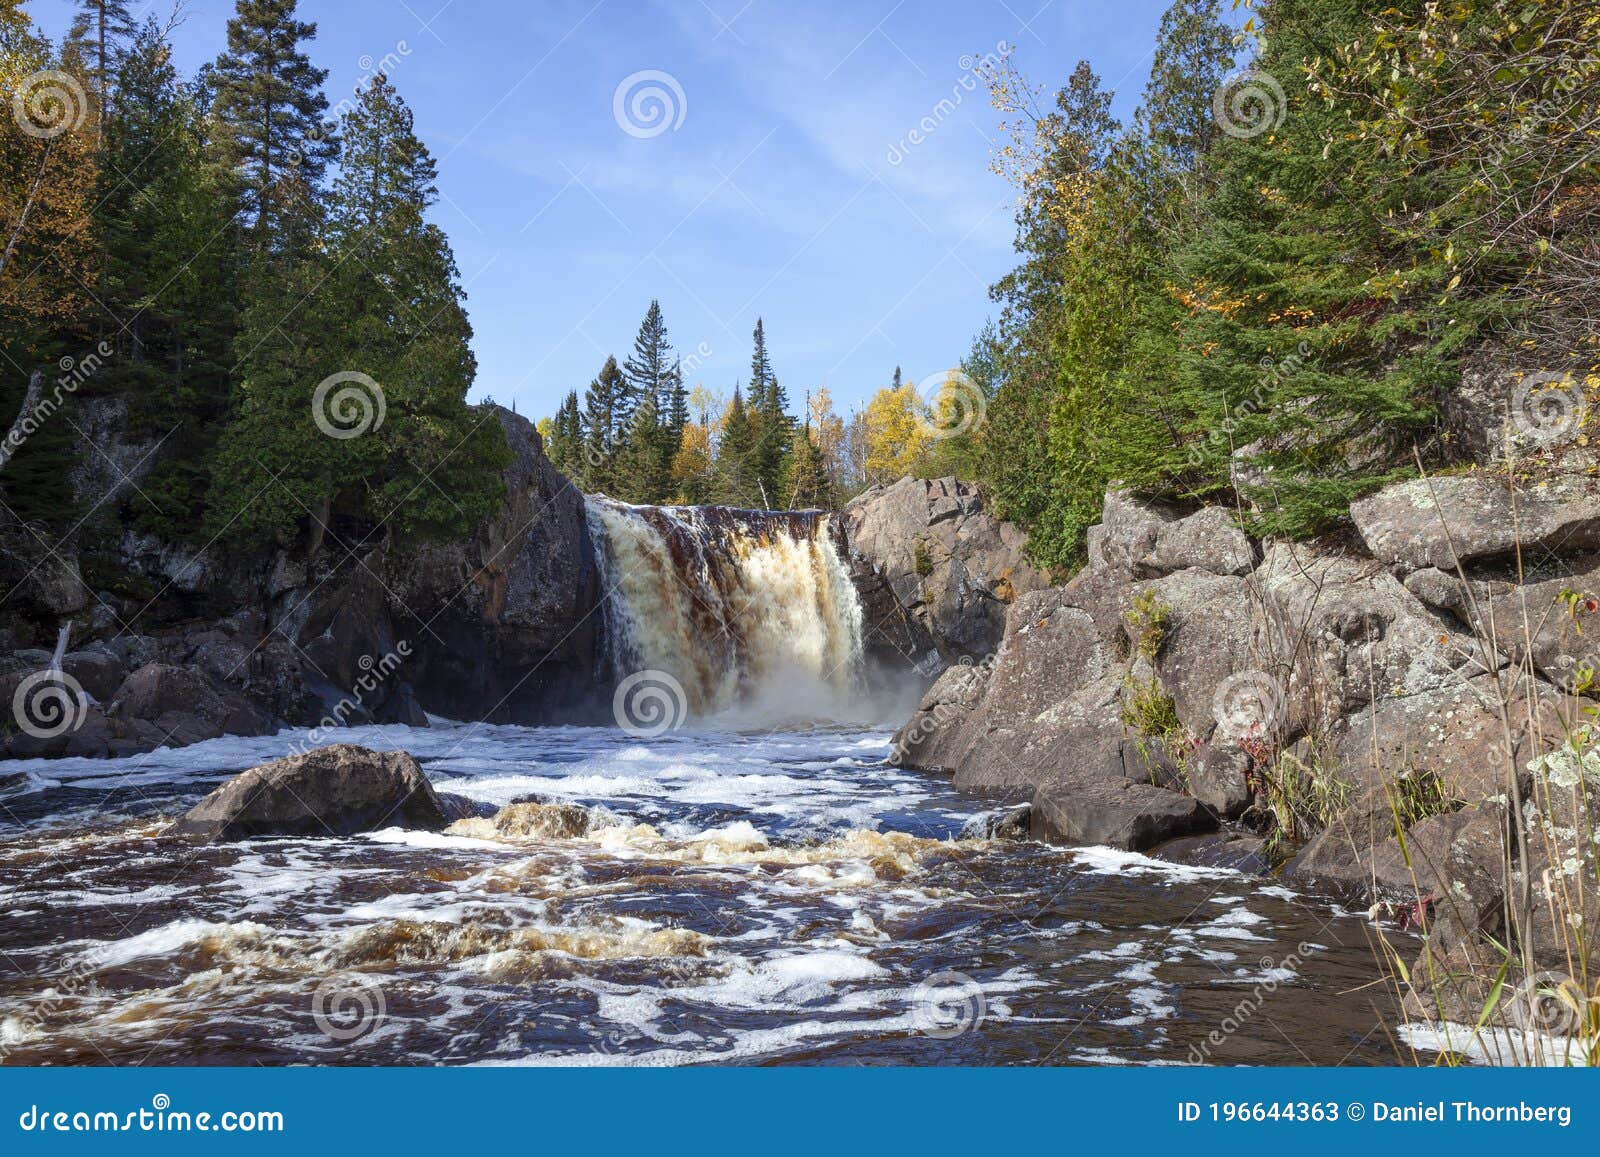 waterfall on a river 0n the north shore of minnesota during autumn